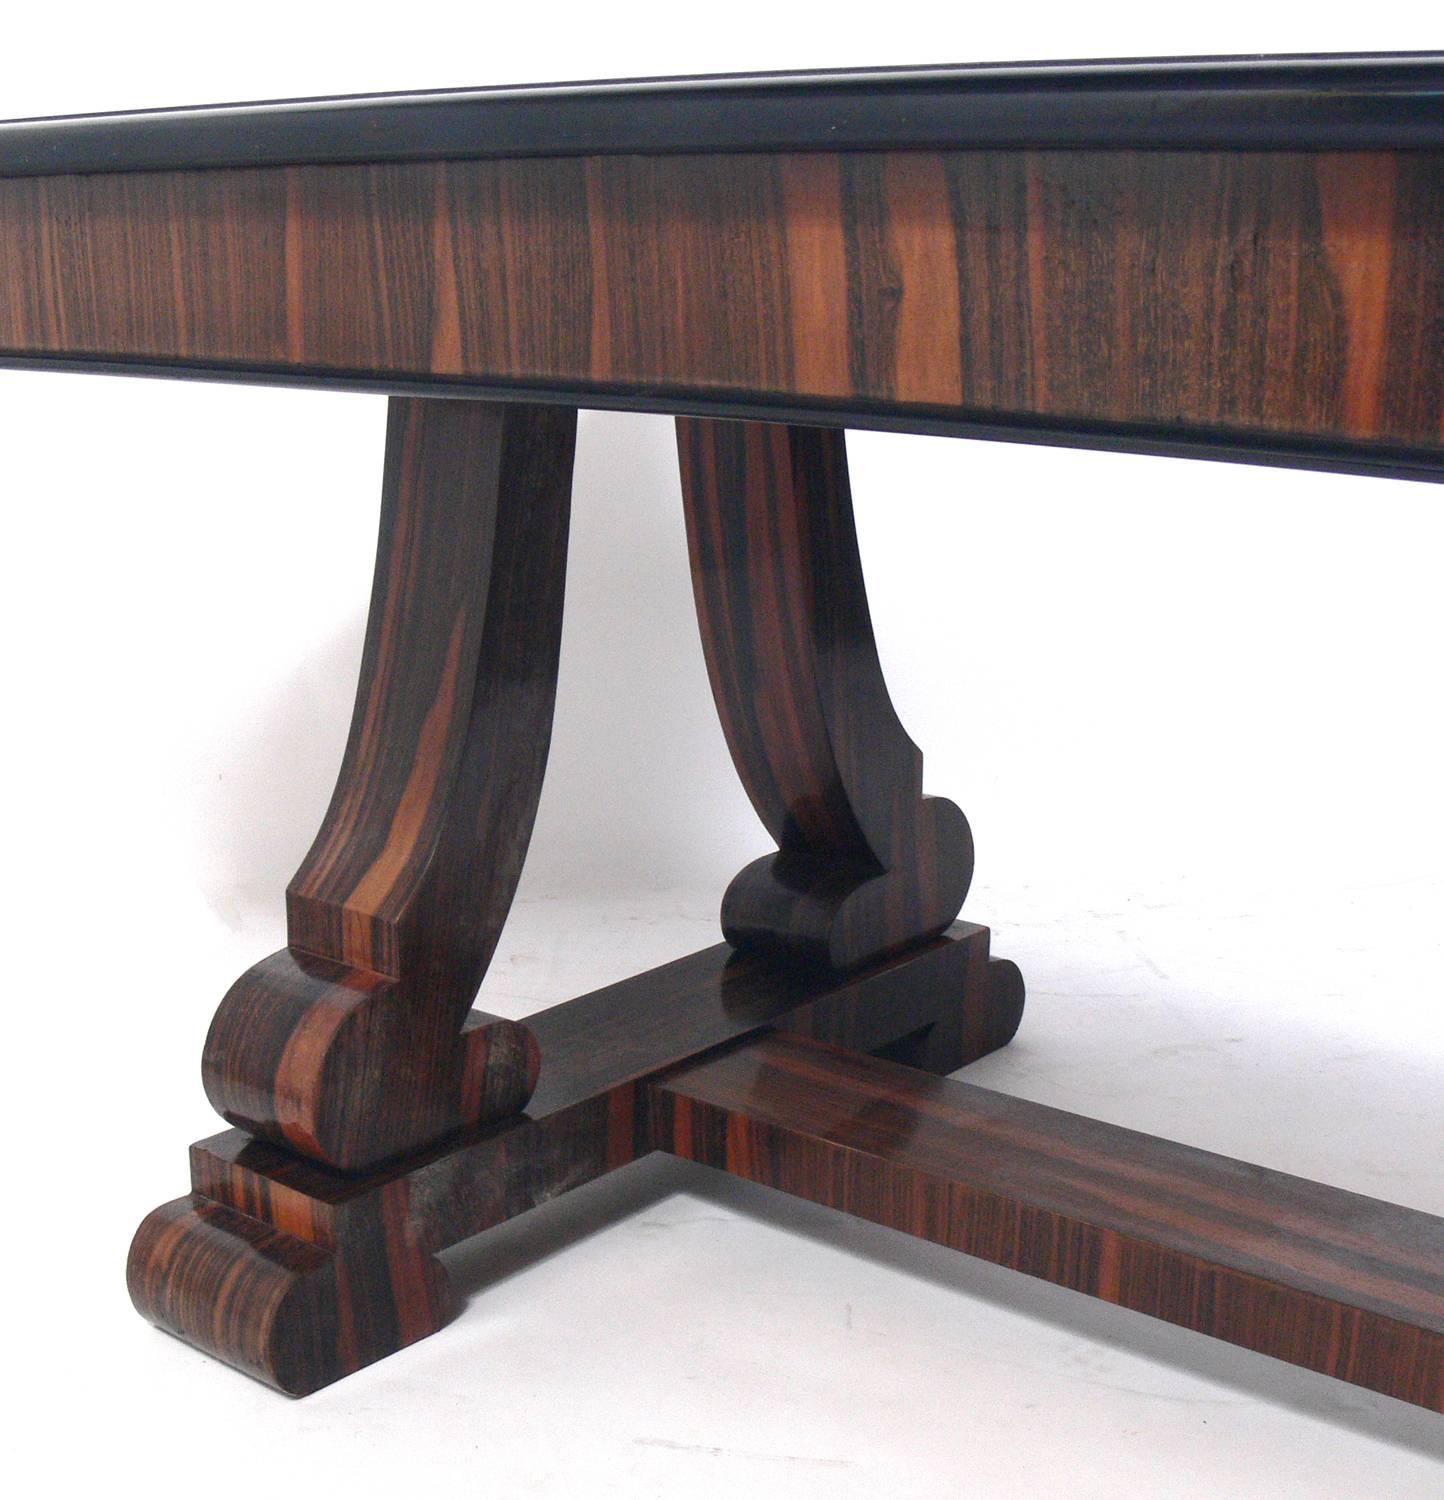 Mid-20th Century French Art Deco Rosewood Dining Table or Library Table